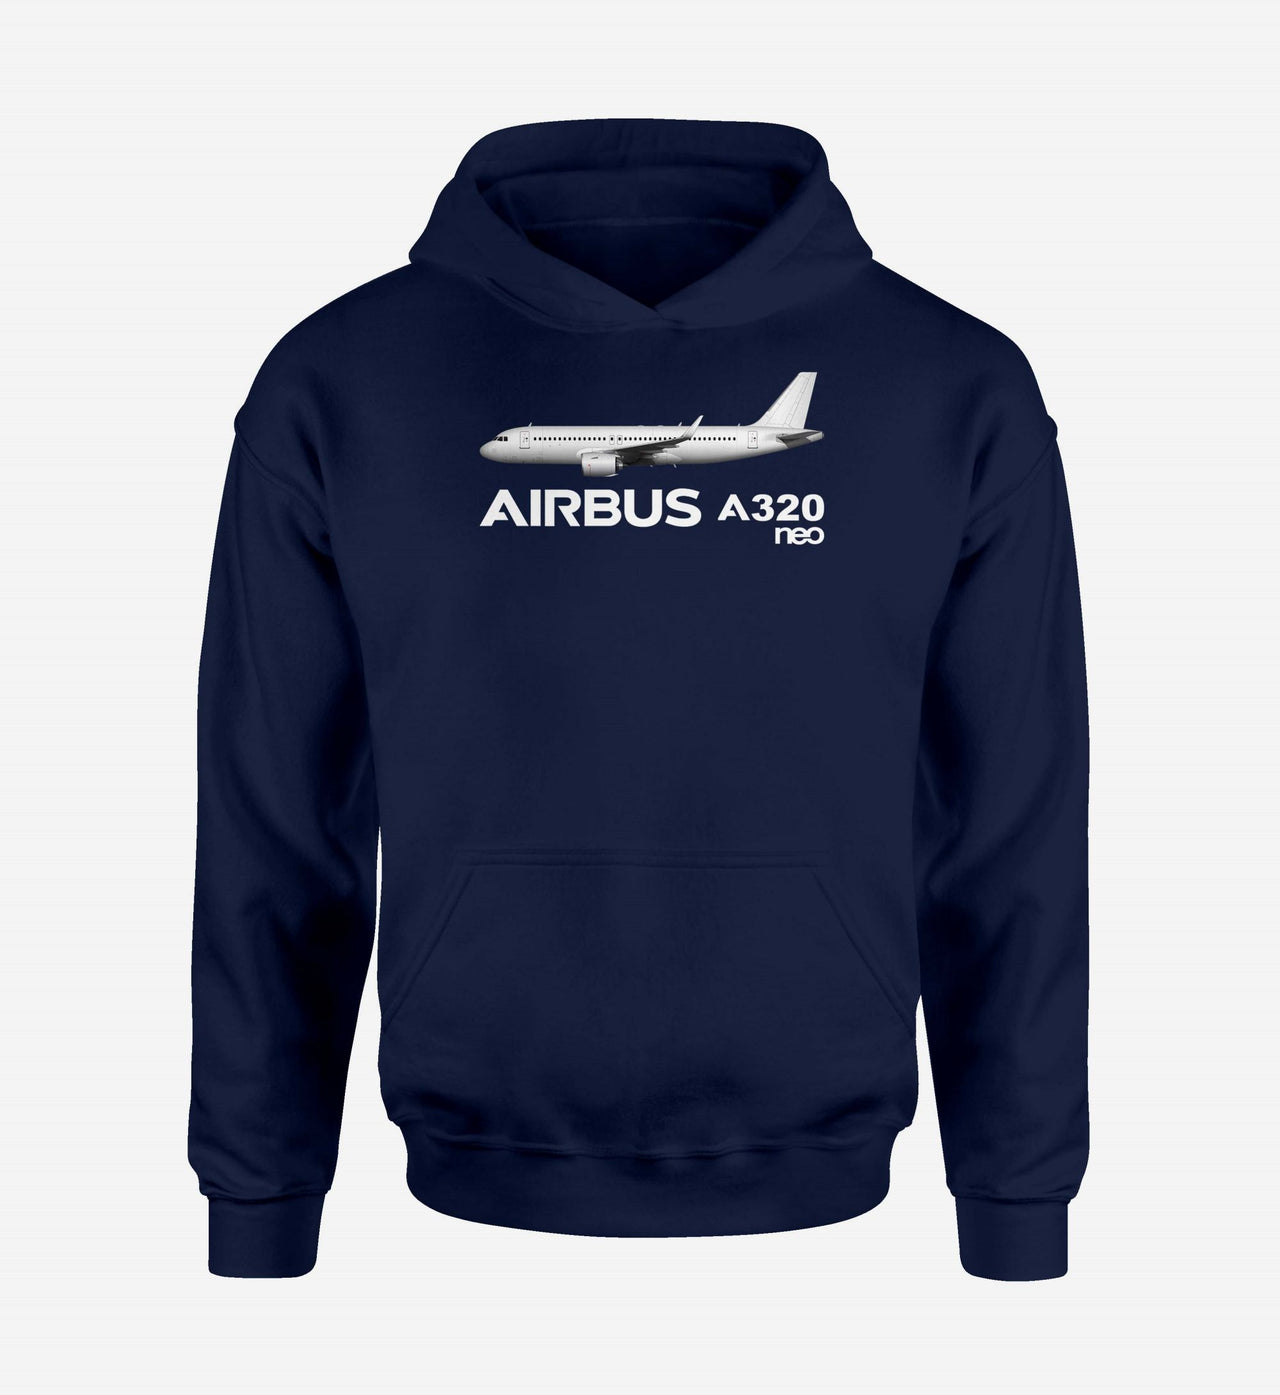 The Airbus A320Neo Designed Hoodies